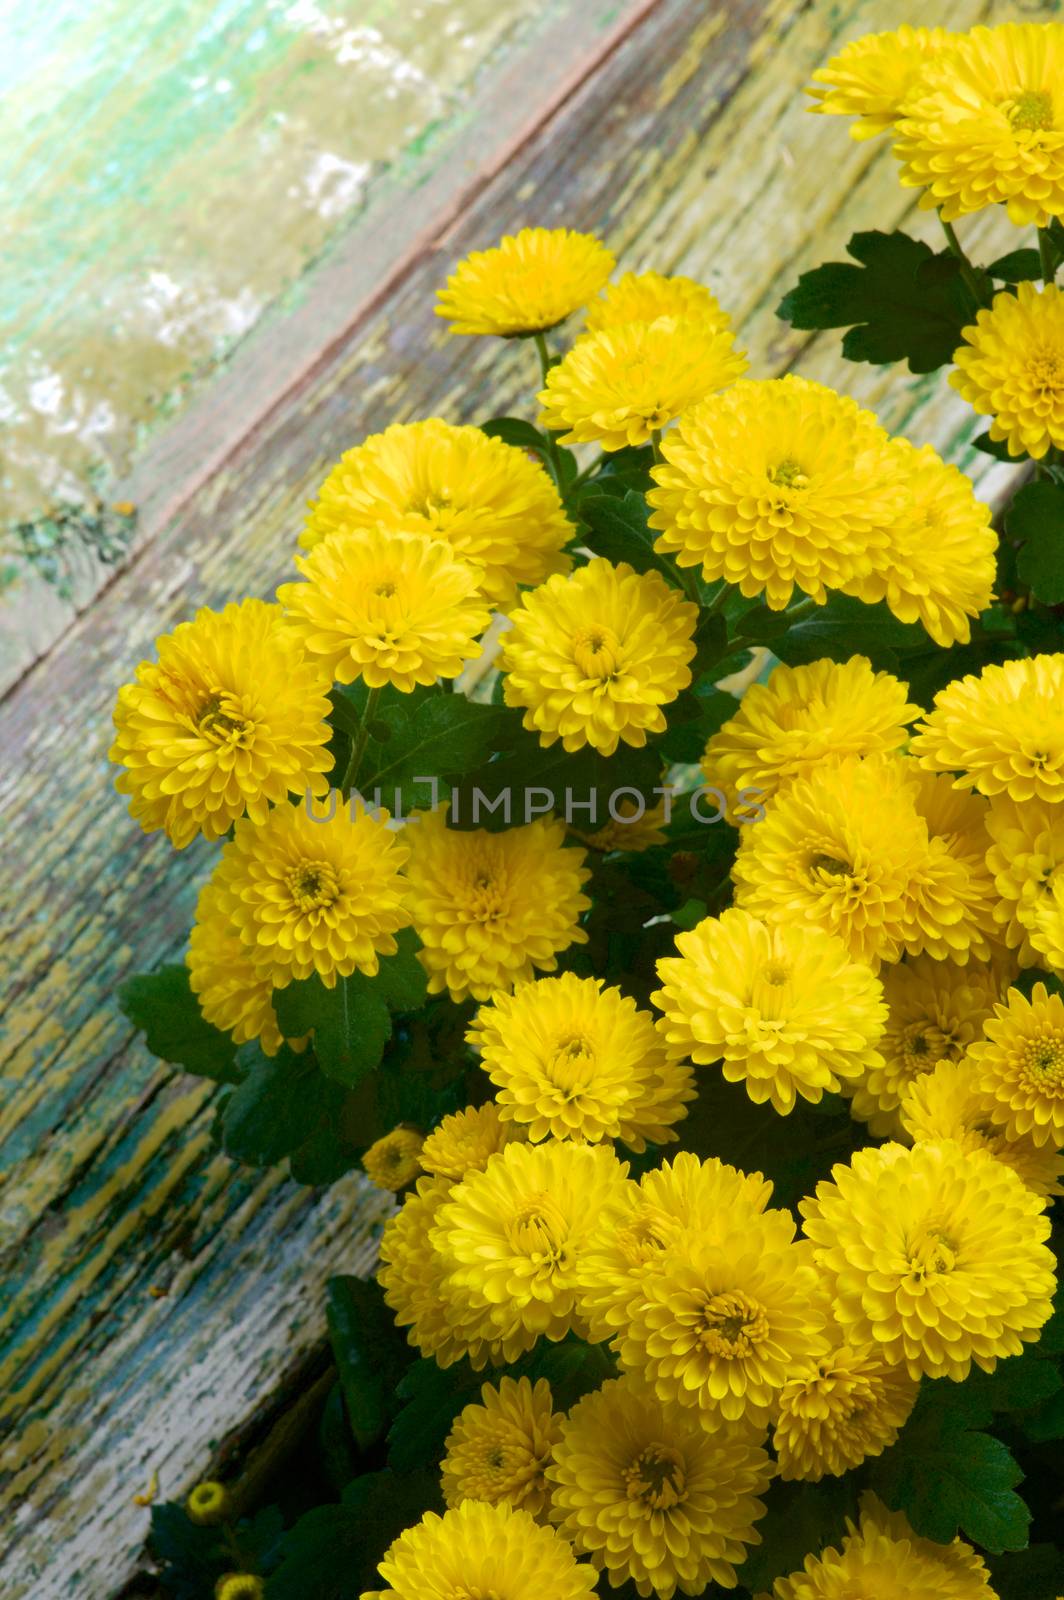 Bunch of Beauty Small Yellow Chrysanthemum closeup on Green Cracked Wooden background